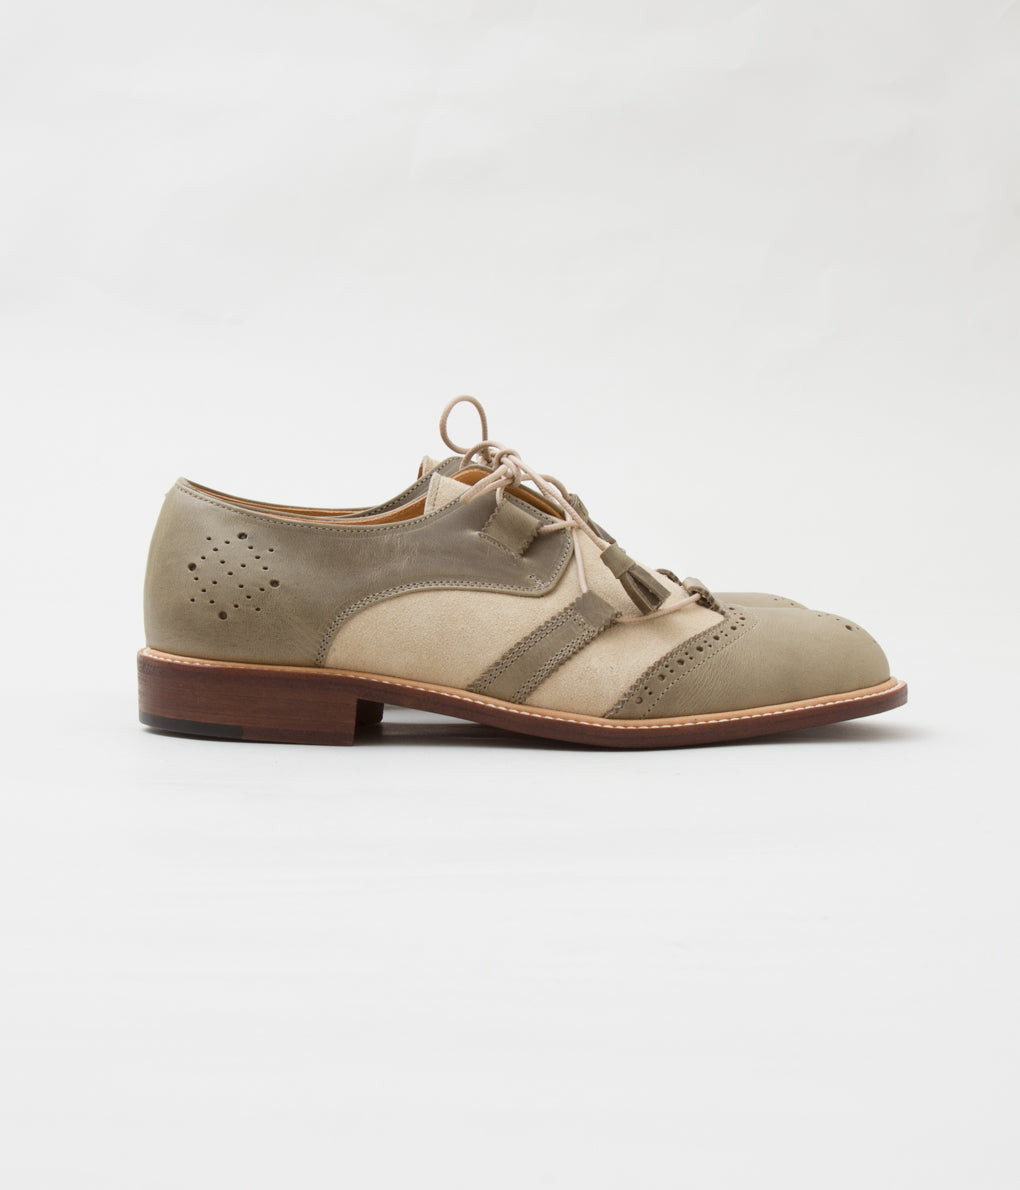 THE OLD CURIOSITY SHOP "#13843 CLASSIC GILLIE SHOES"(OLIVE)